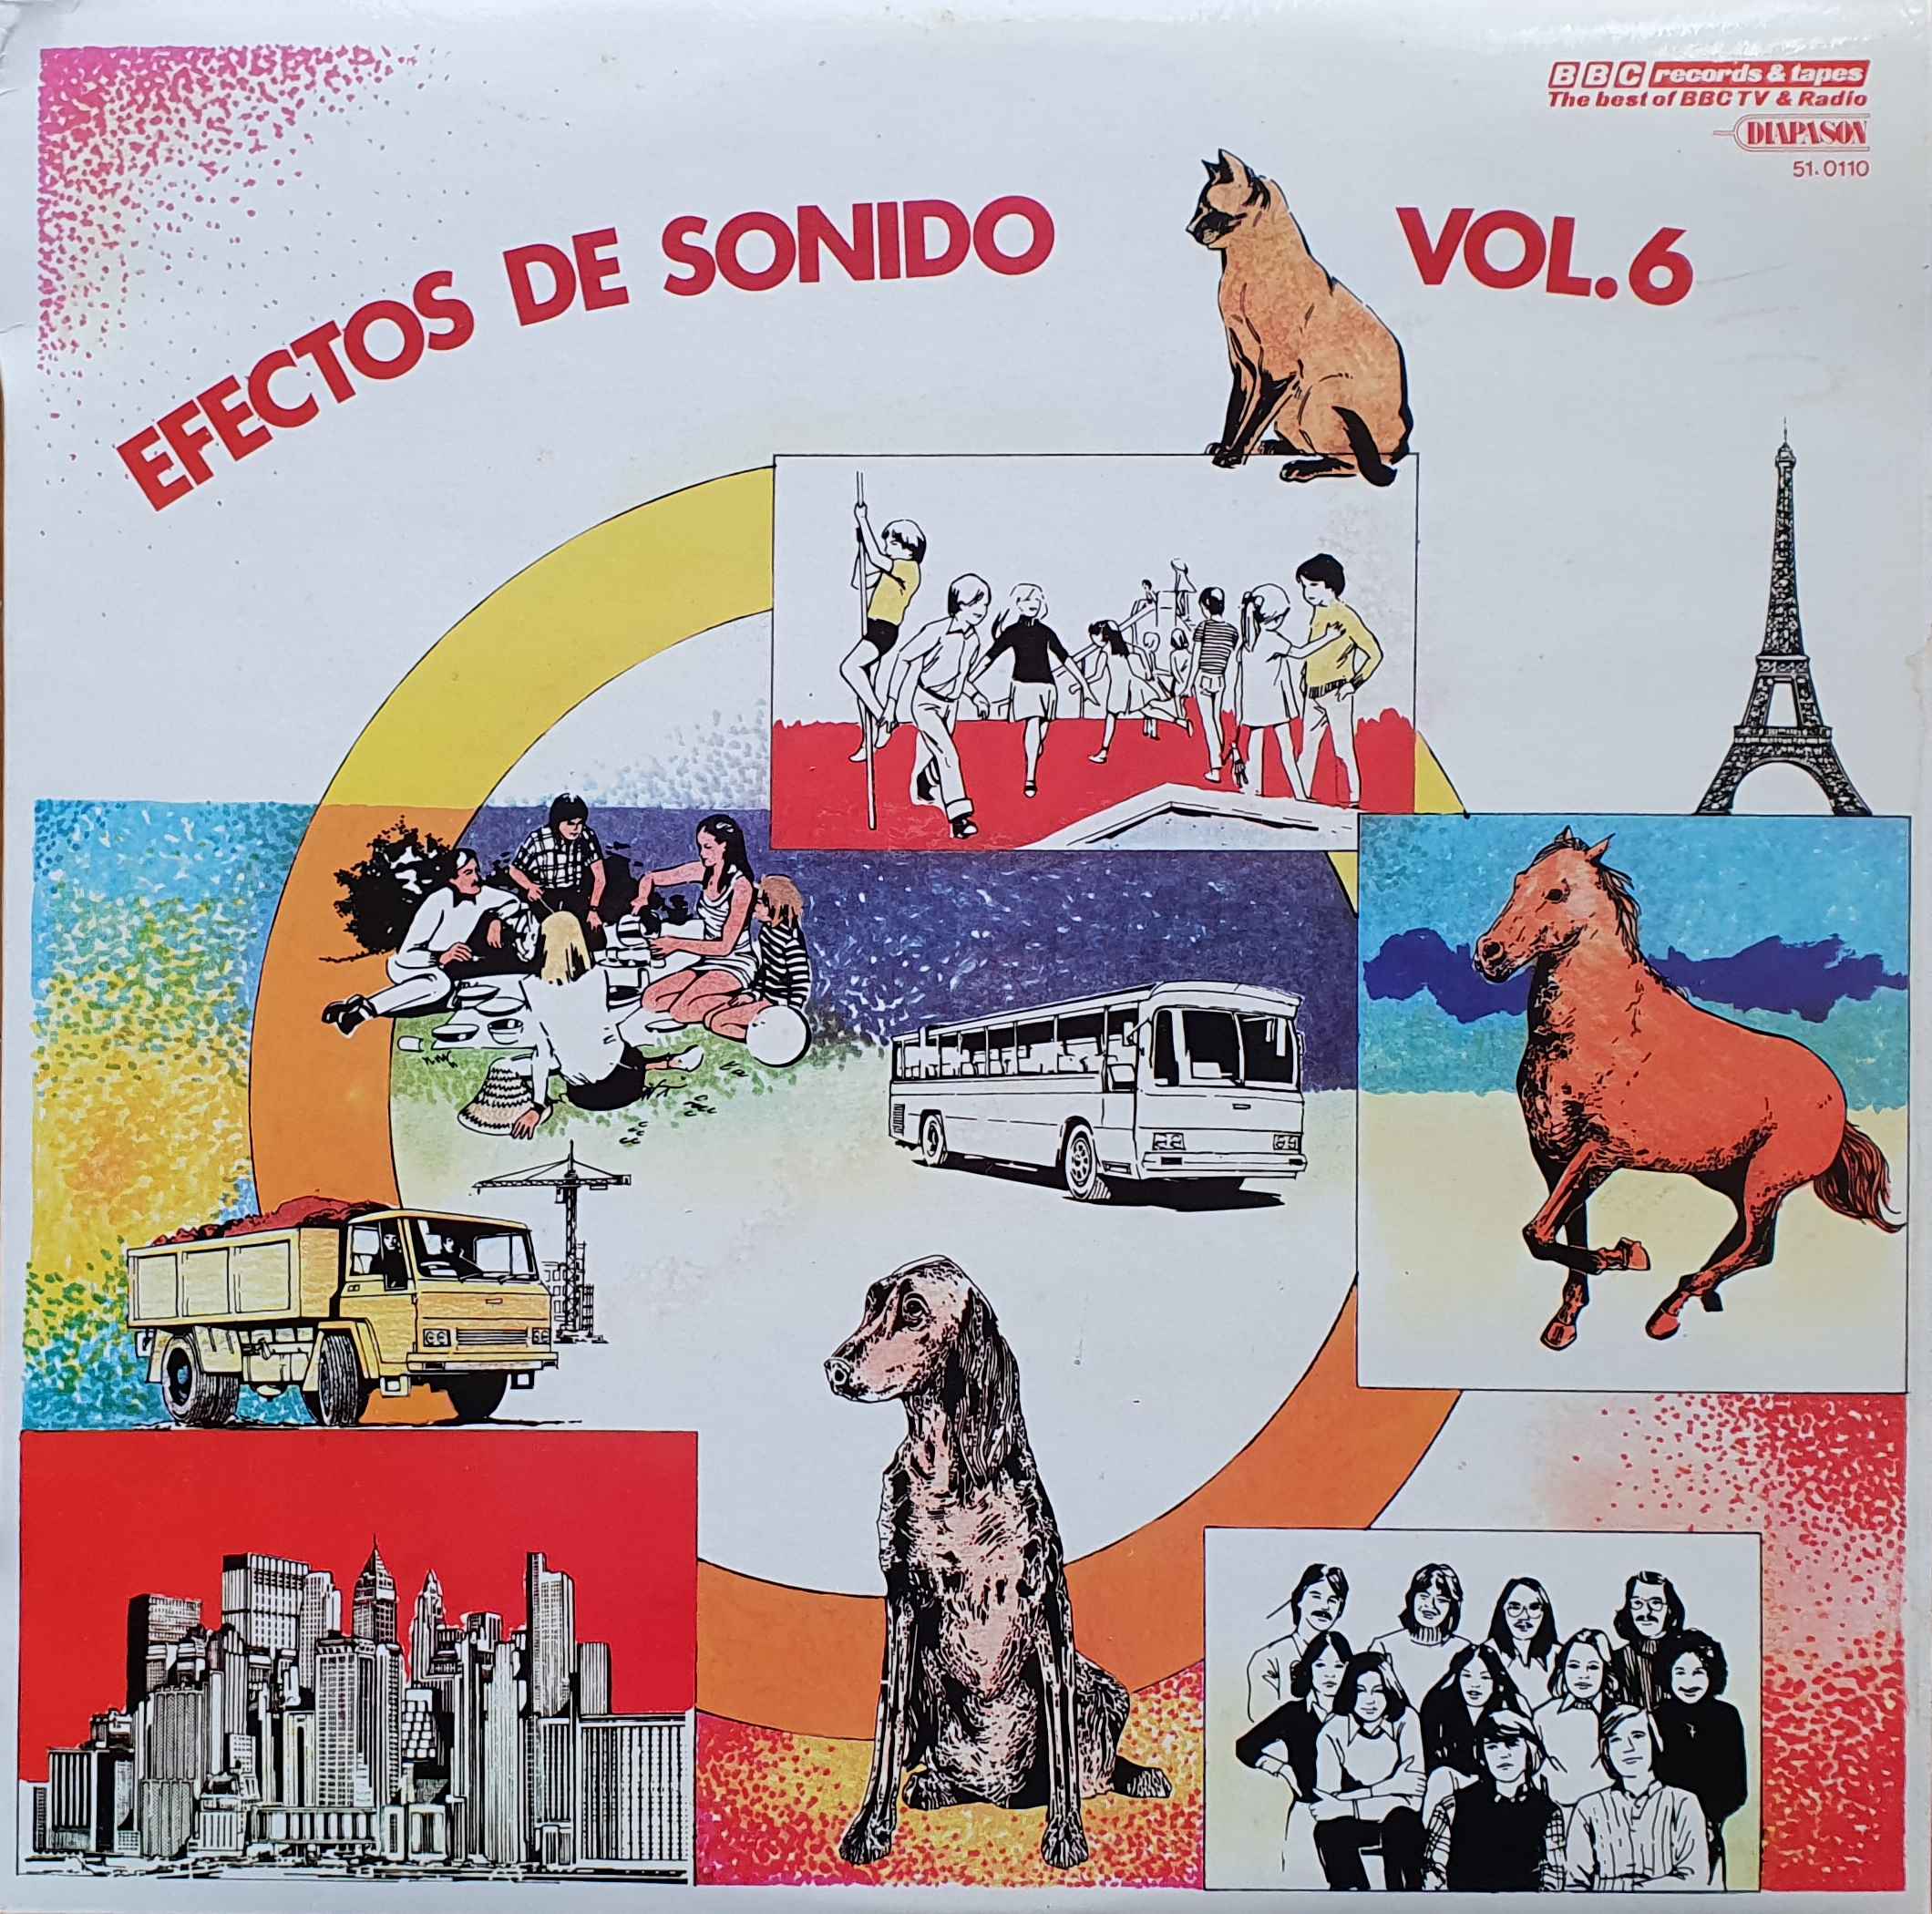 Picture of Efectos de sonido No 6 by artist Various from the BBC albums - Records and Tapes library